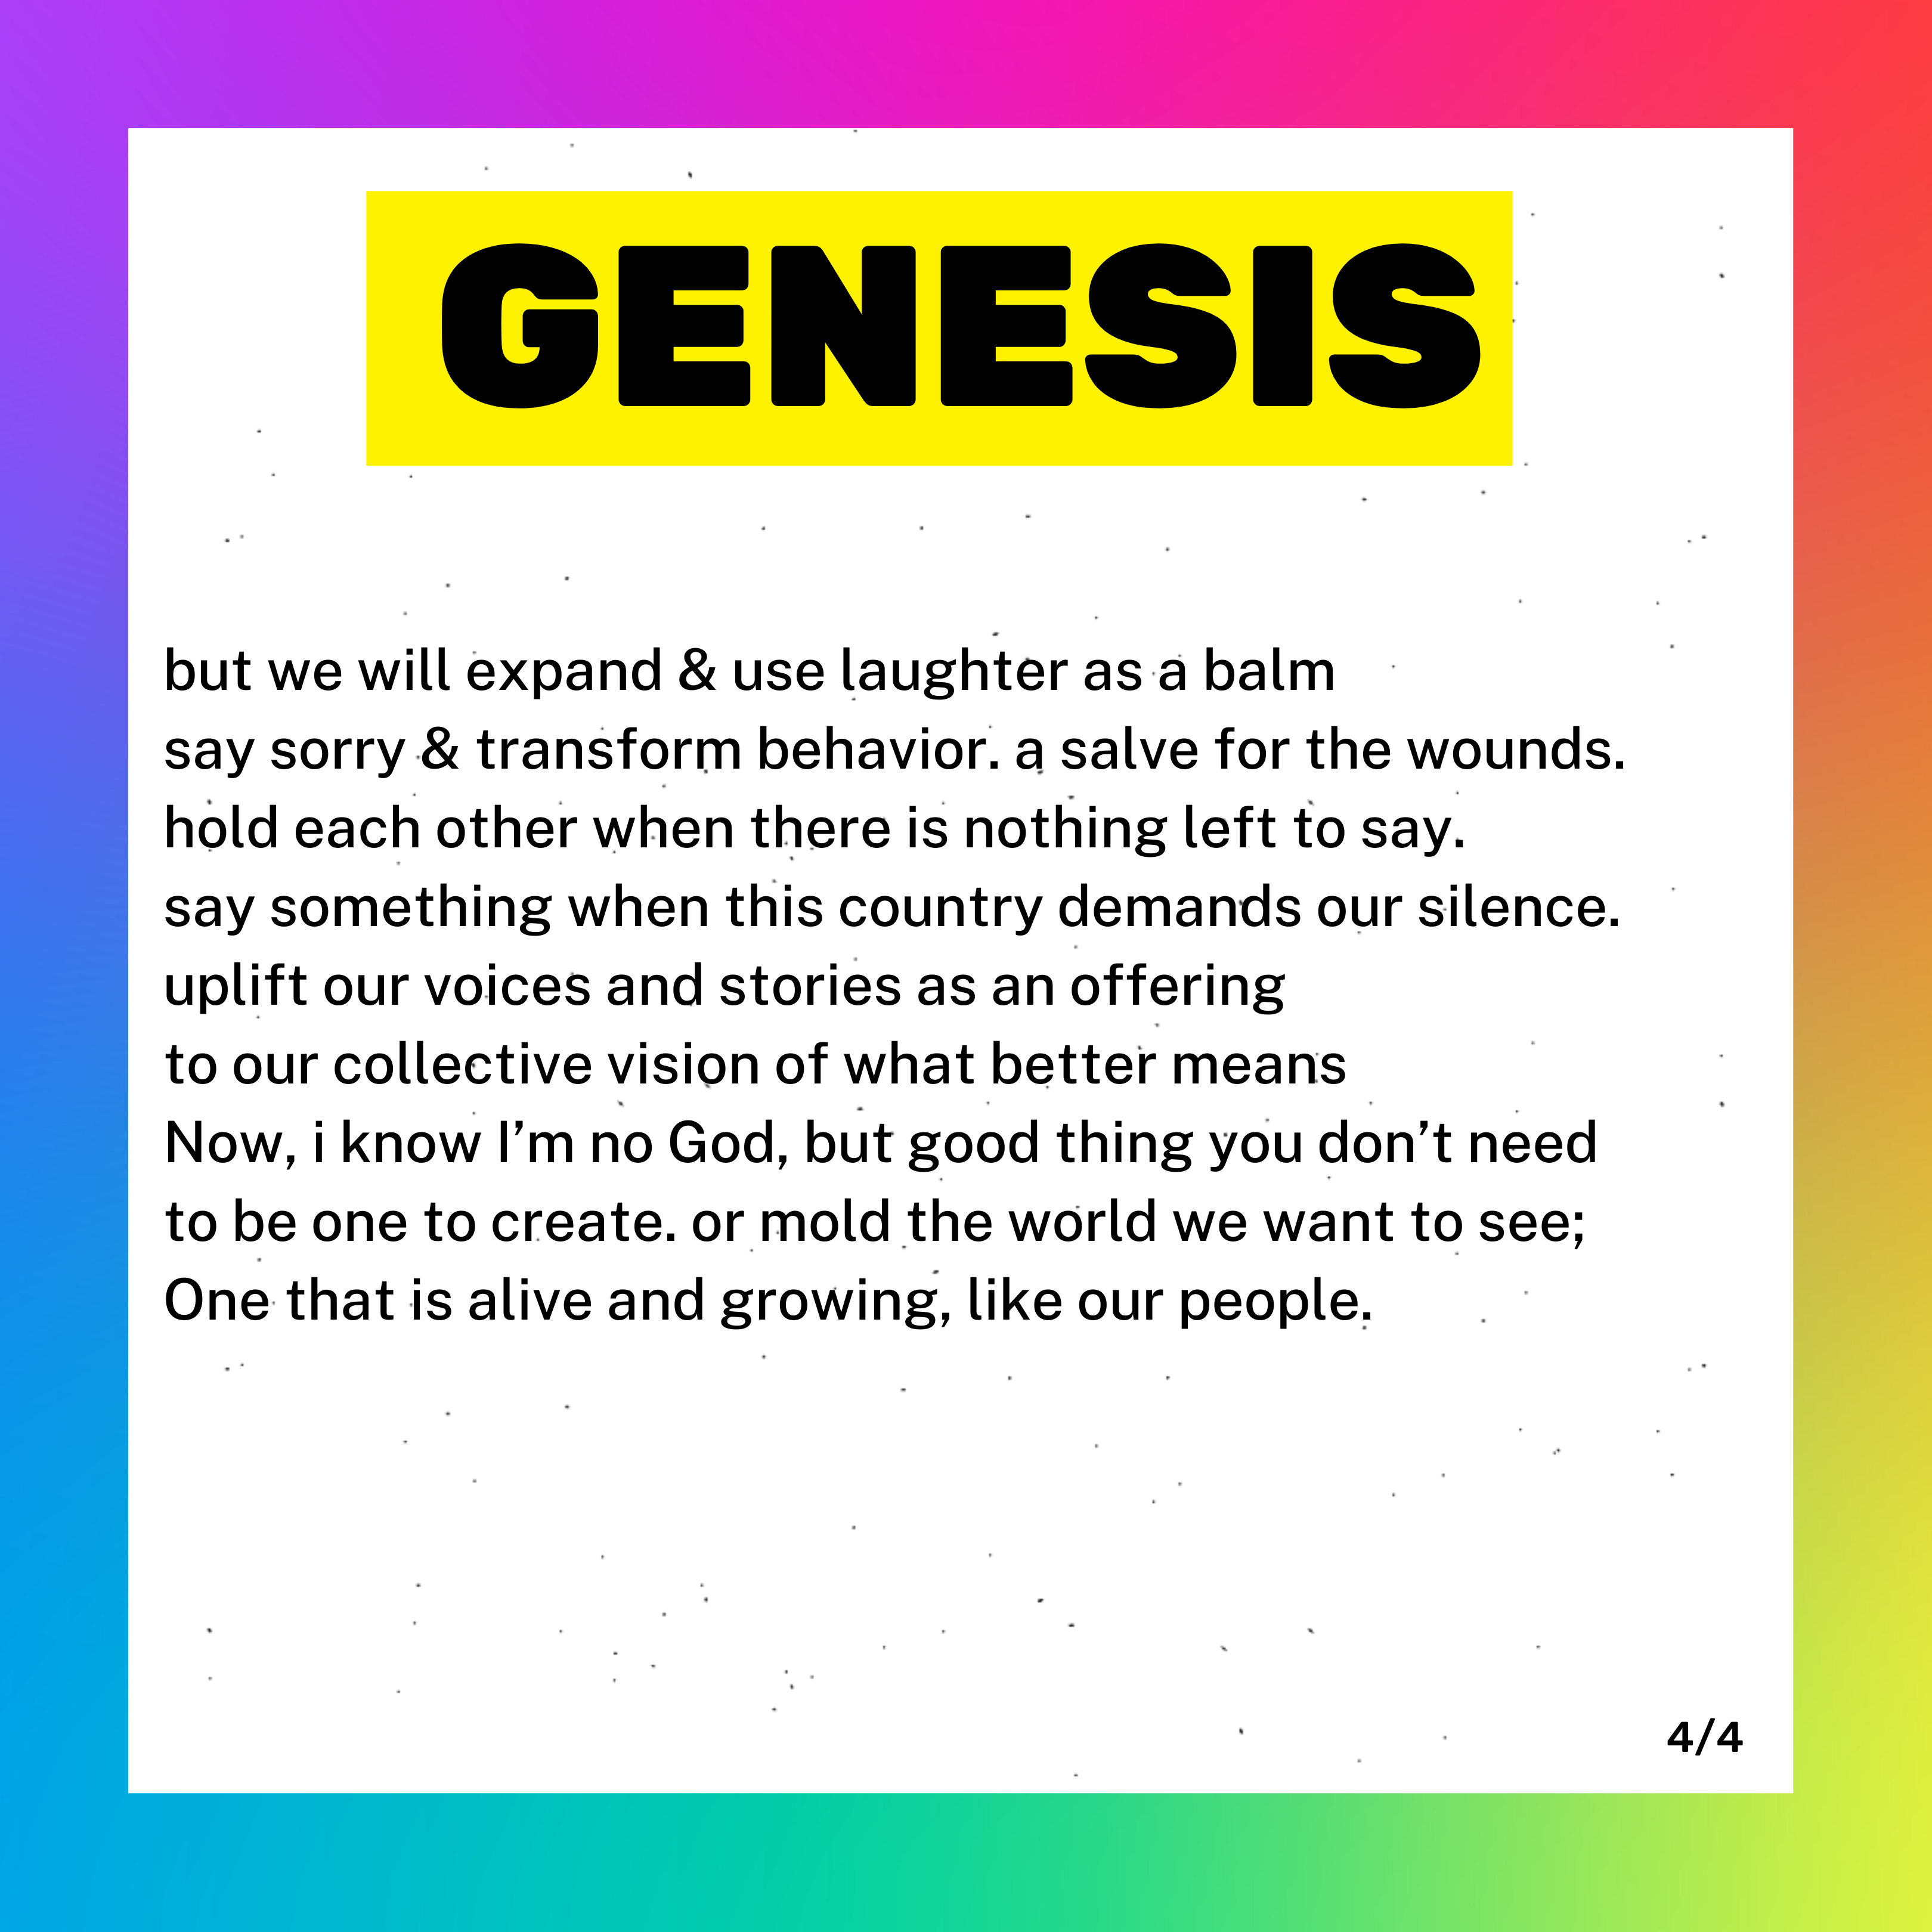 a box with a rainbow background and white foreground. Inside the box it says GENESIS; it is part 4 of a poem titled Genesis. Beneath Genesis it reads: "but we will expand and use laughter as a balm say sorry and transform behavior. a salve for wounds. Hold each other when there is nothing left to say. say something when this country demands our silence. Uplift our voices and stories of what better means. Now, I know I'm no God, but good thing you don't need to be one to create. Or mold the world we want to see; One that is alive and growing, like our people."